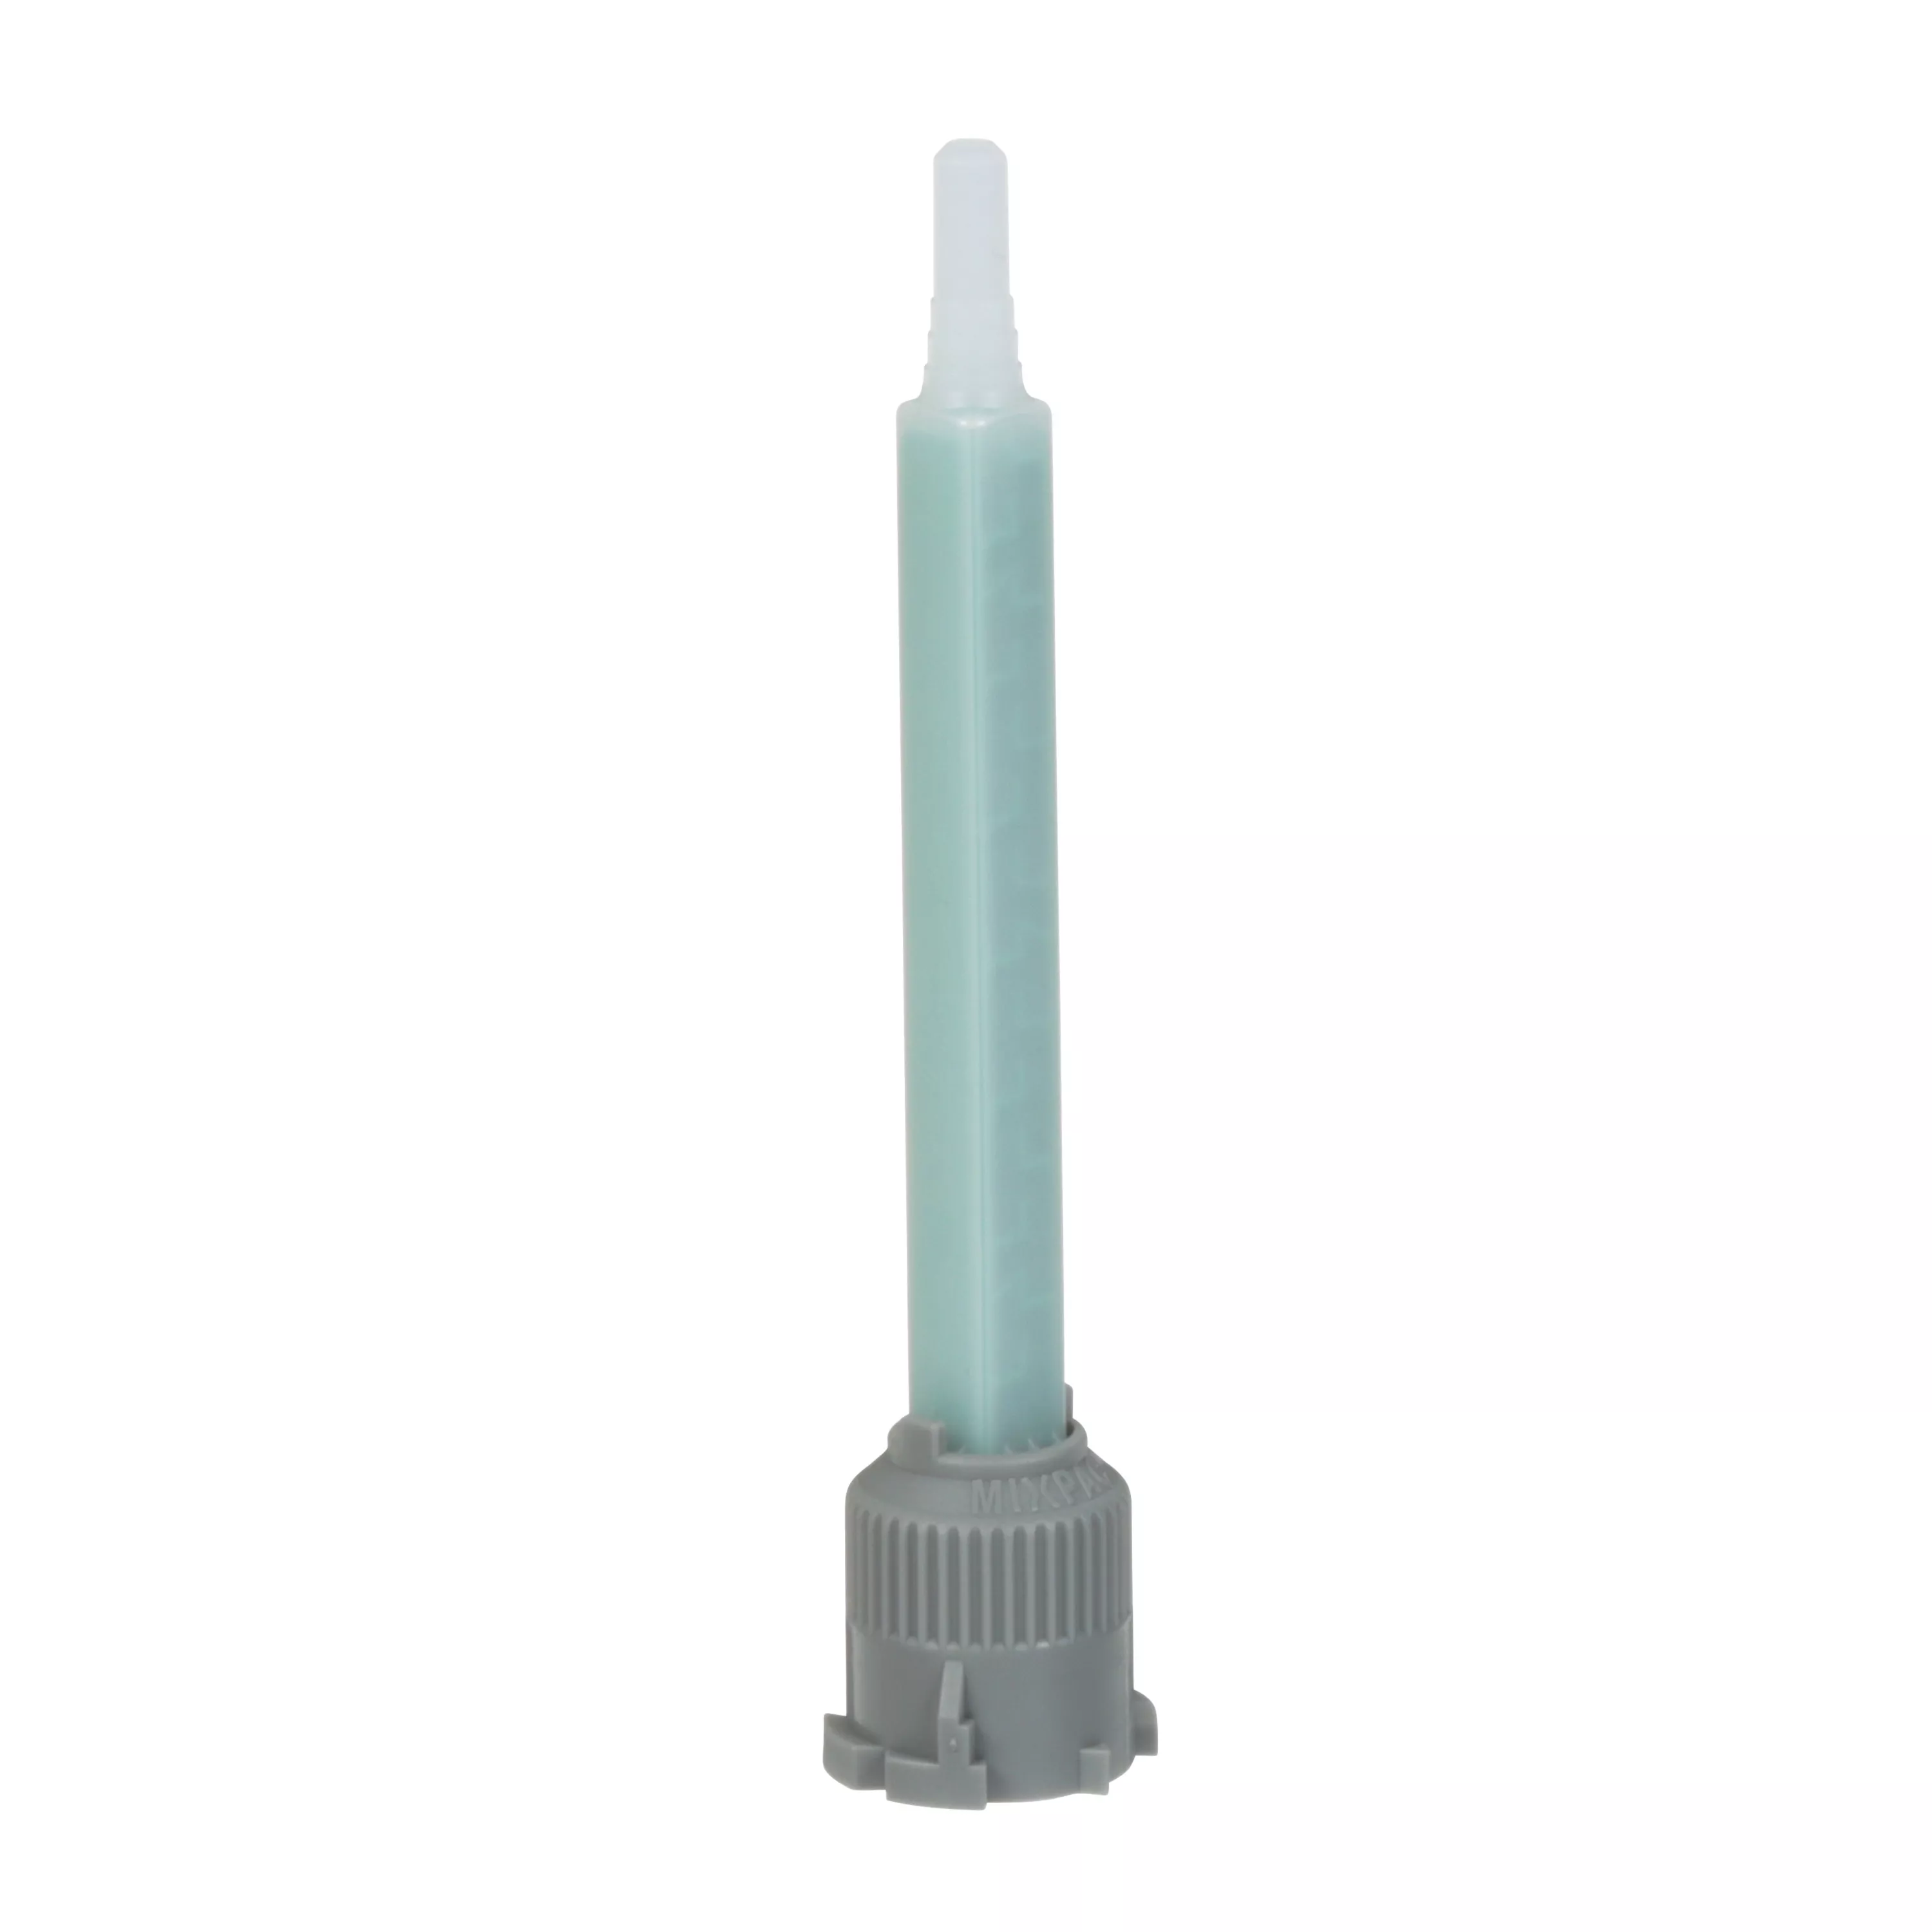 Product Number Nozzle | 3M™ Scotch-Weld™ EPX Mixing Nozzle